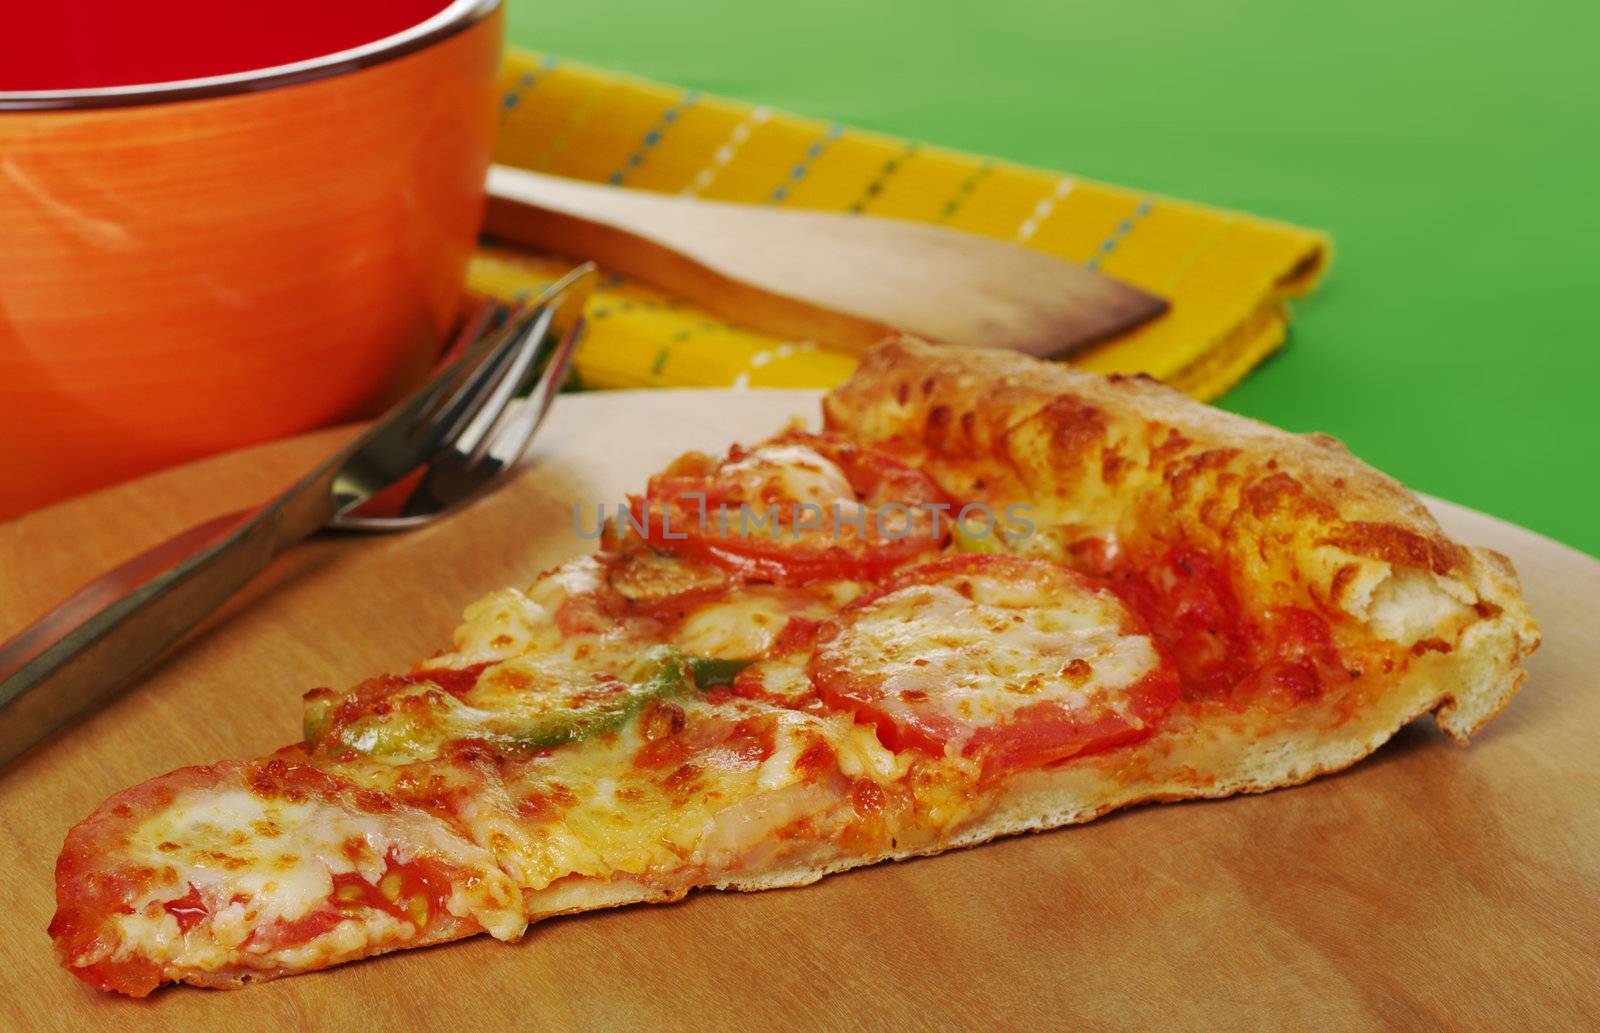 A slice of a pizza on wooden board with cutlery, bowl and table mat (Selective Focus)